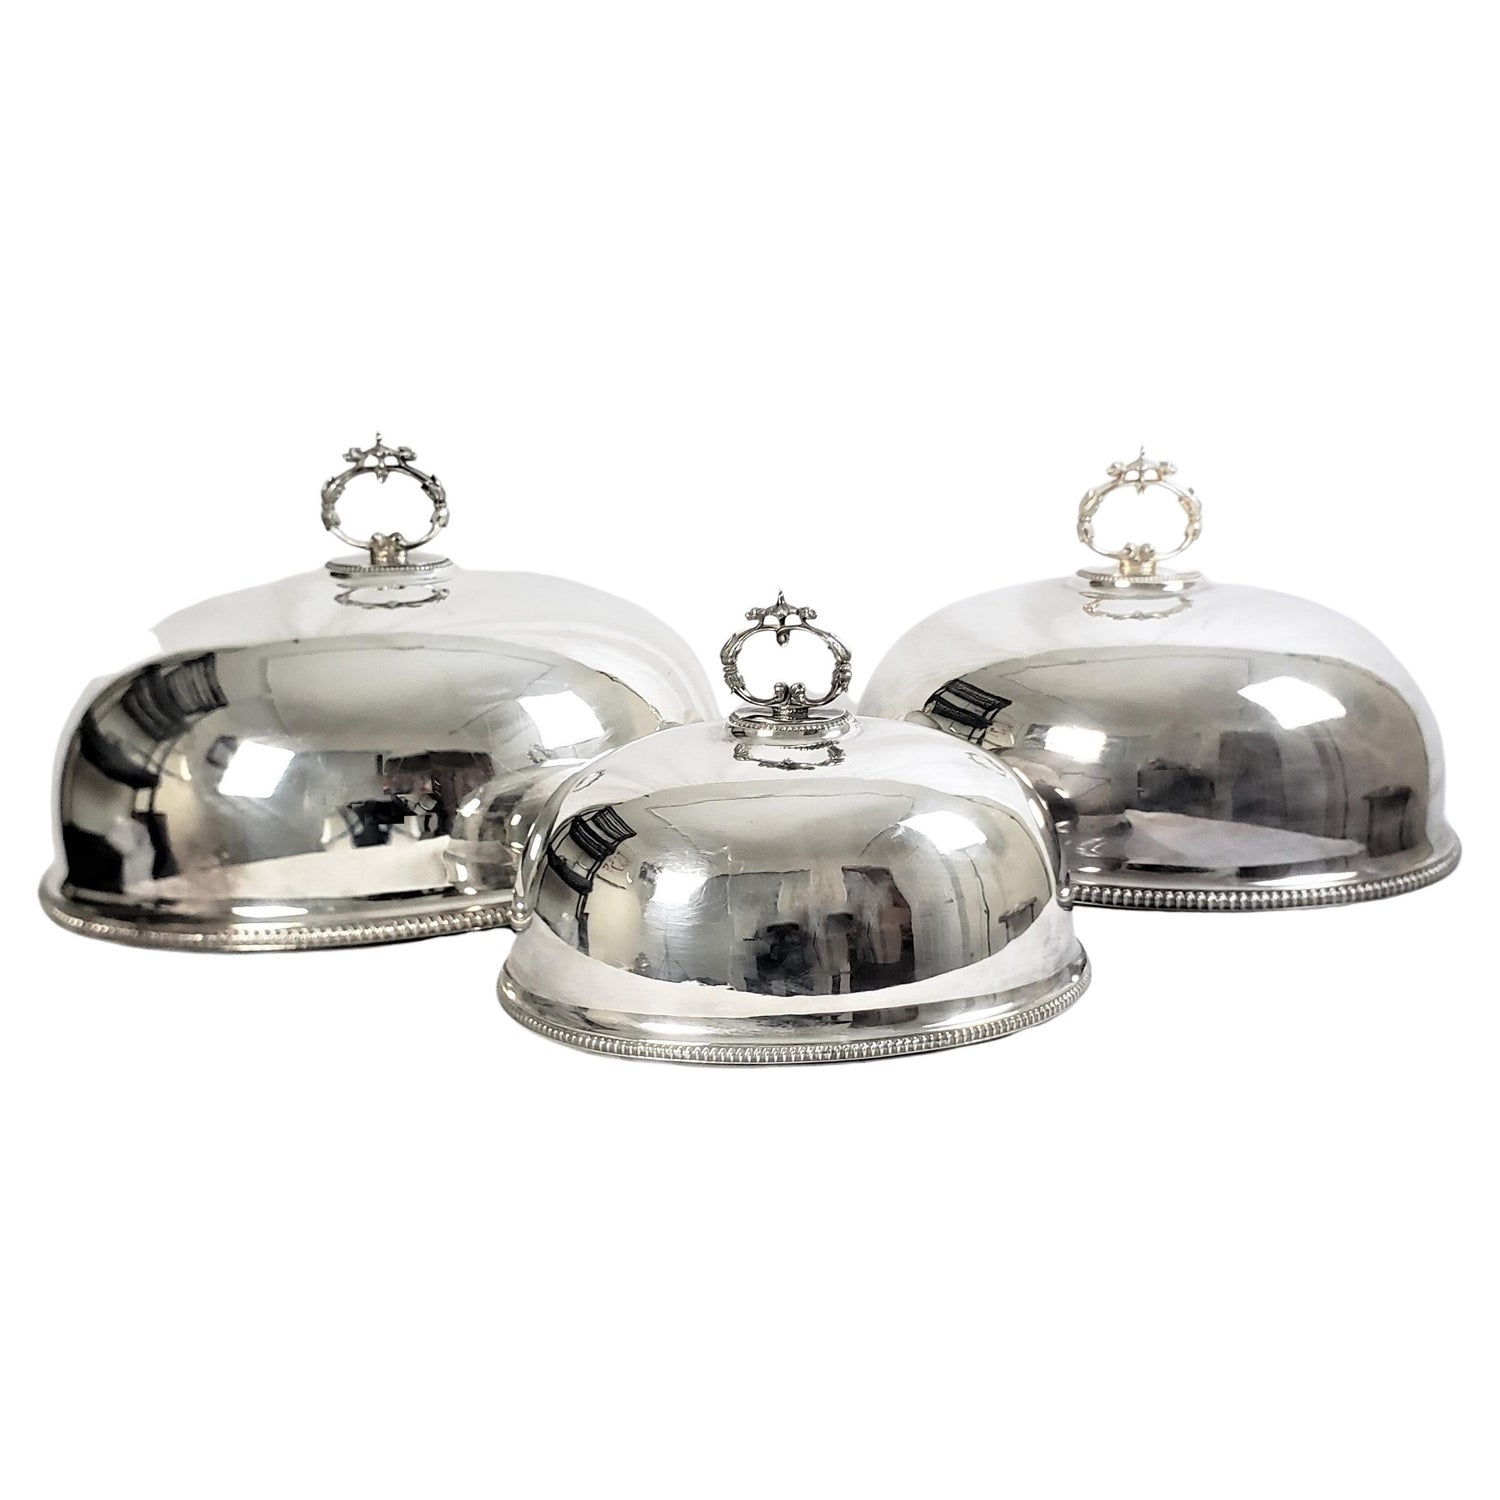 https://a.1stdibscdn.com/antique-hand-crafted-silver-plated-graduated-meat-dome-or-entre-cover-set-for-sale/f_13552/f_323603121674437473364/f_32360312_1674437474108_bg_processed.jpg?width=1500